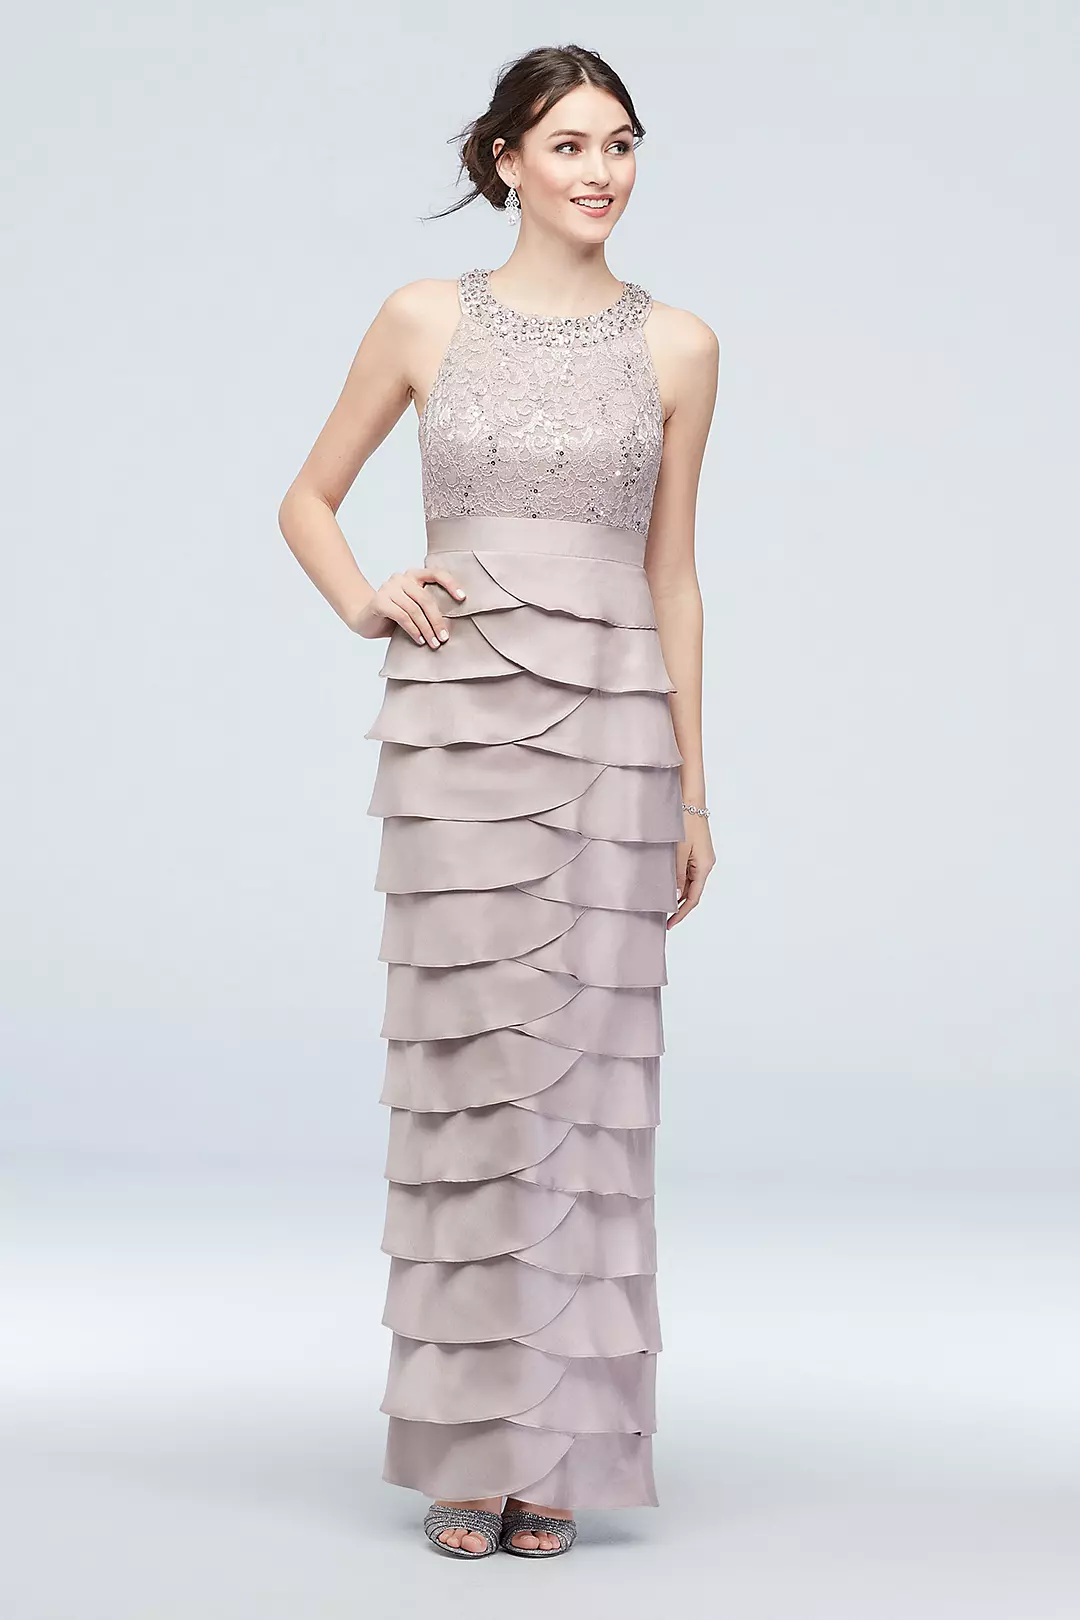 Floral High Circle-Neck Sheath with Ruffle Skirt Image